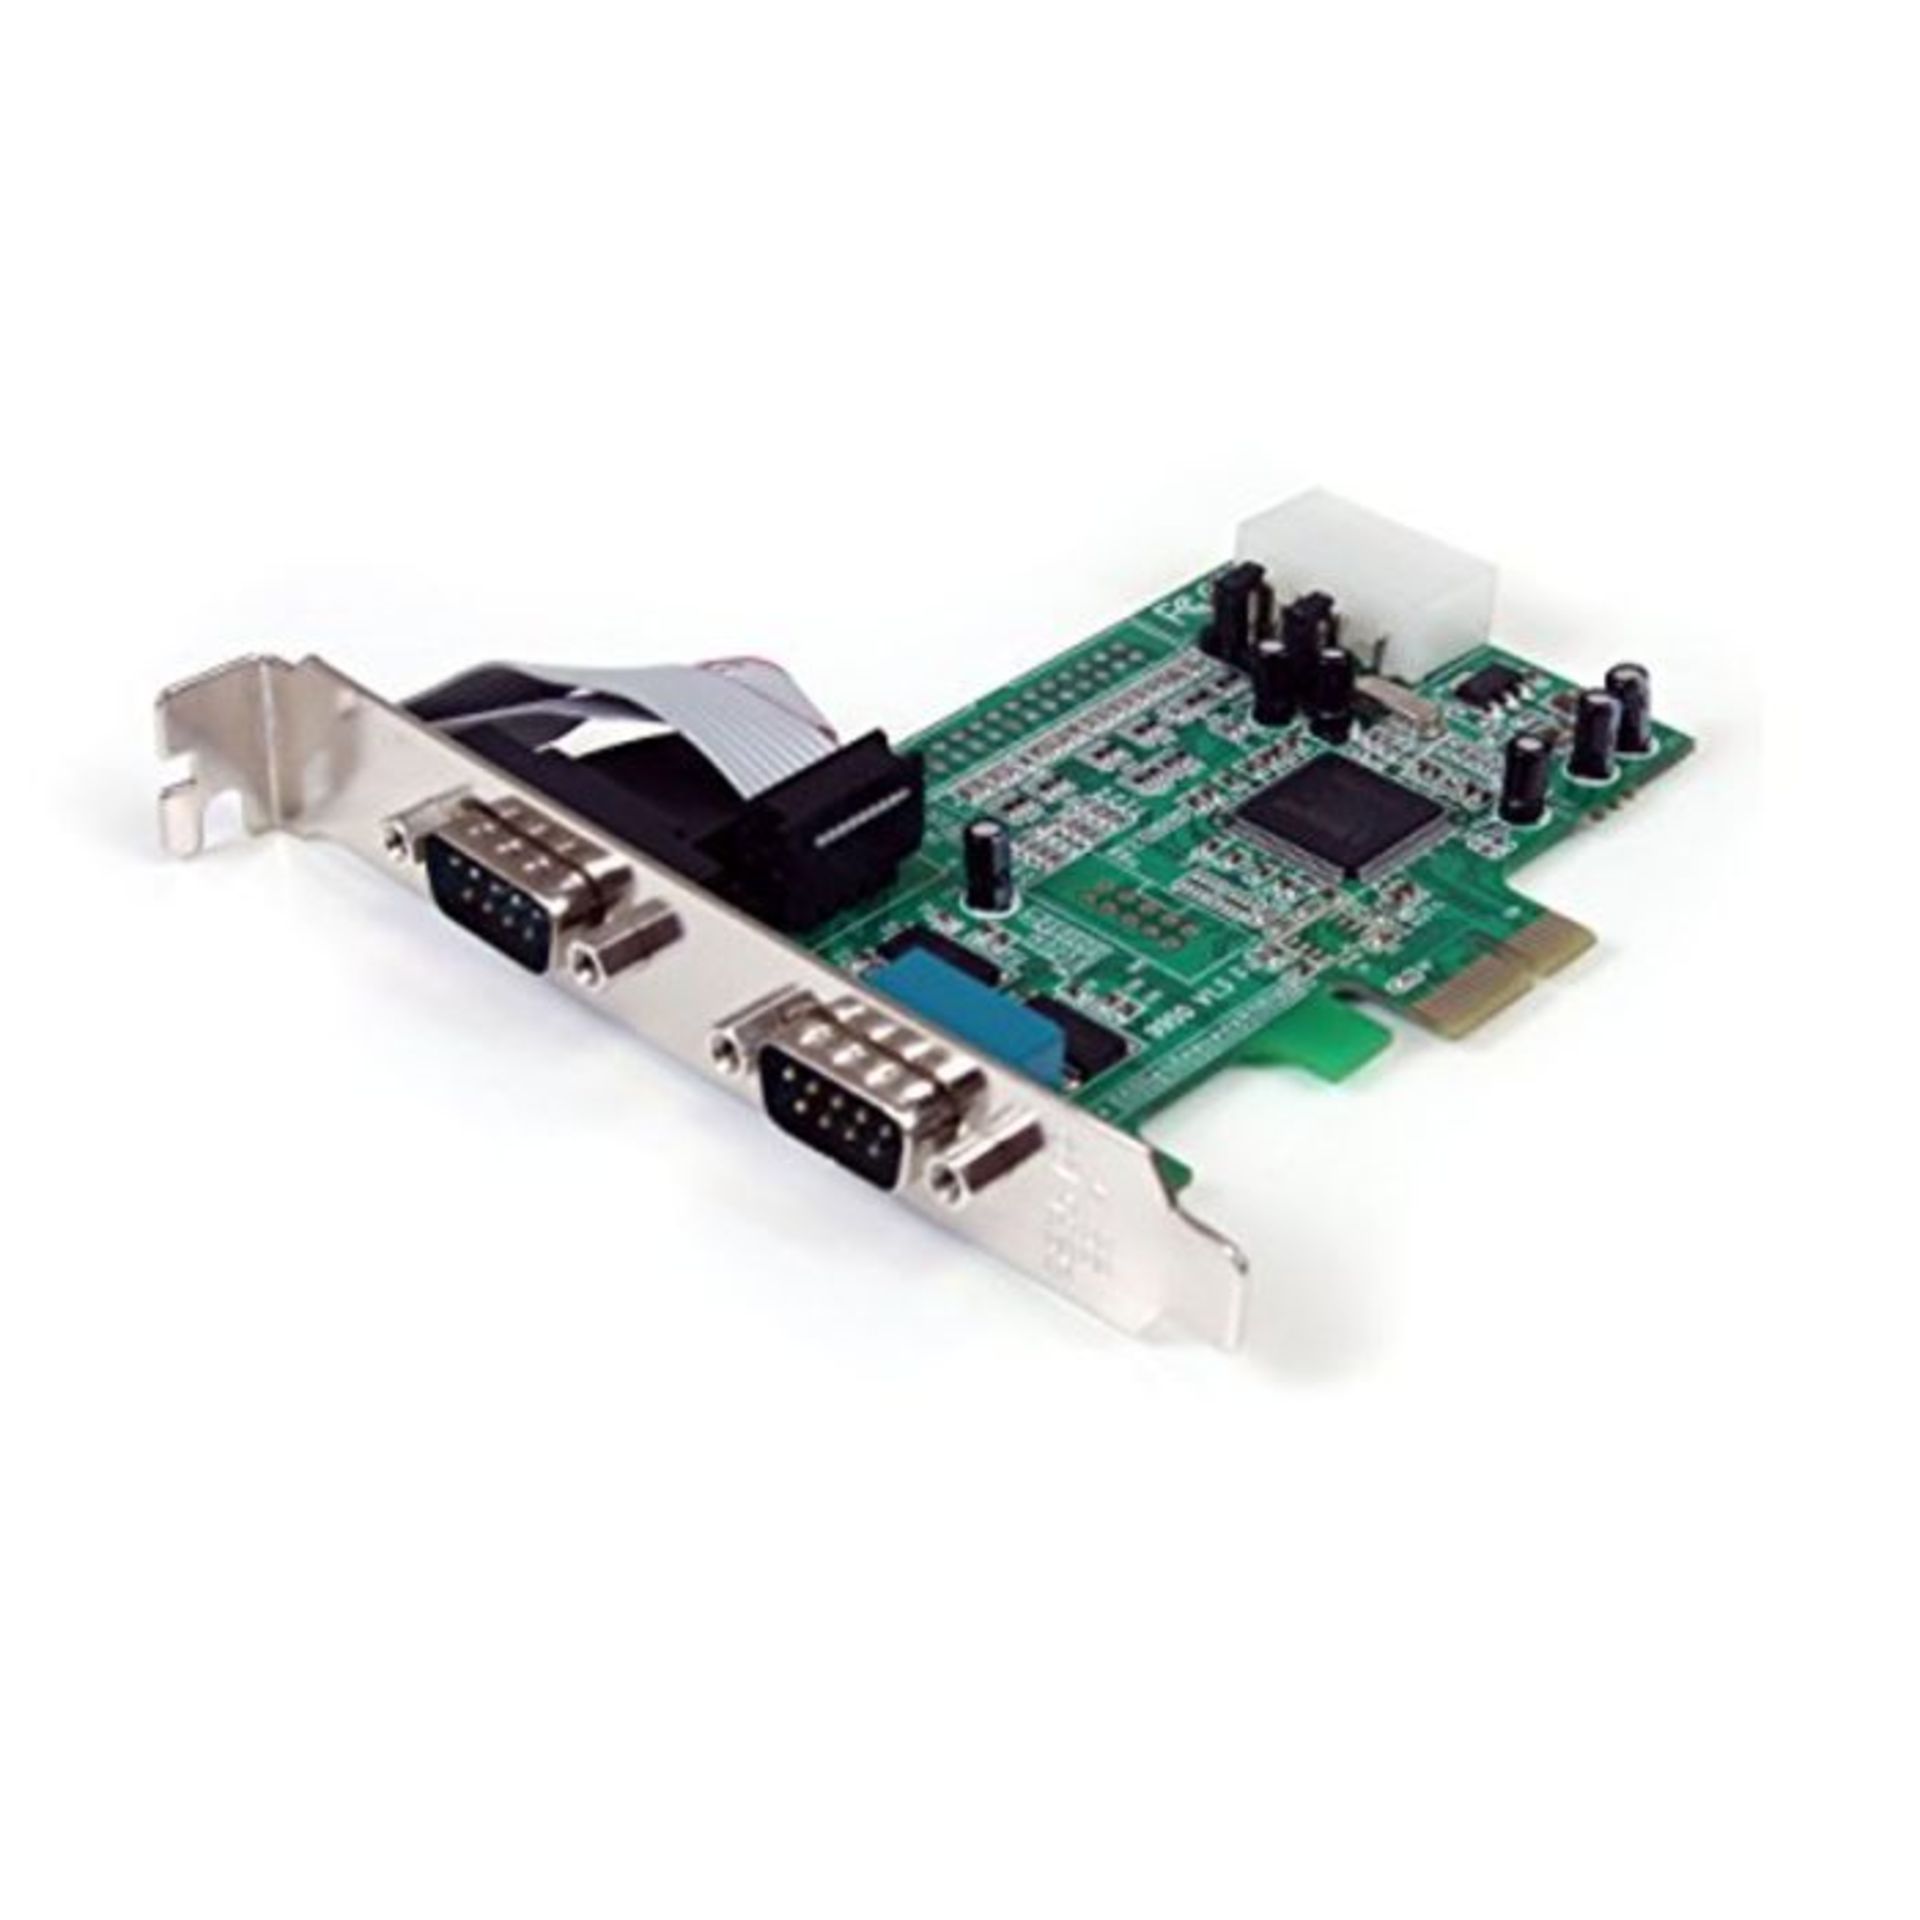 RRP £52.00 StarTech.com PEX2S553 2 Port Native PCIe RS232 Serial Adapter Card with 16550 UART , G